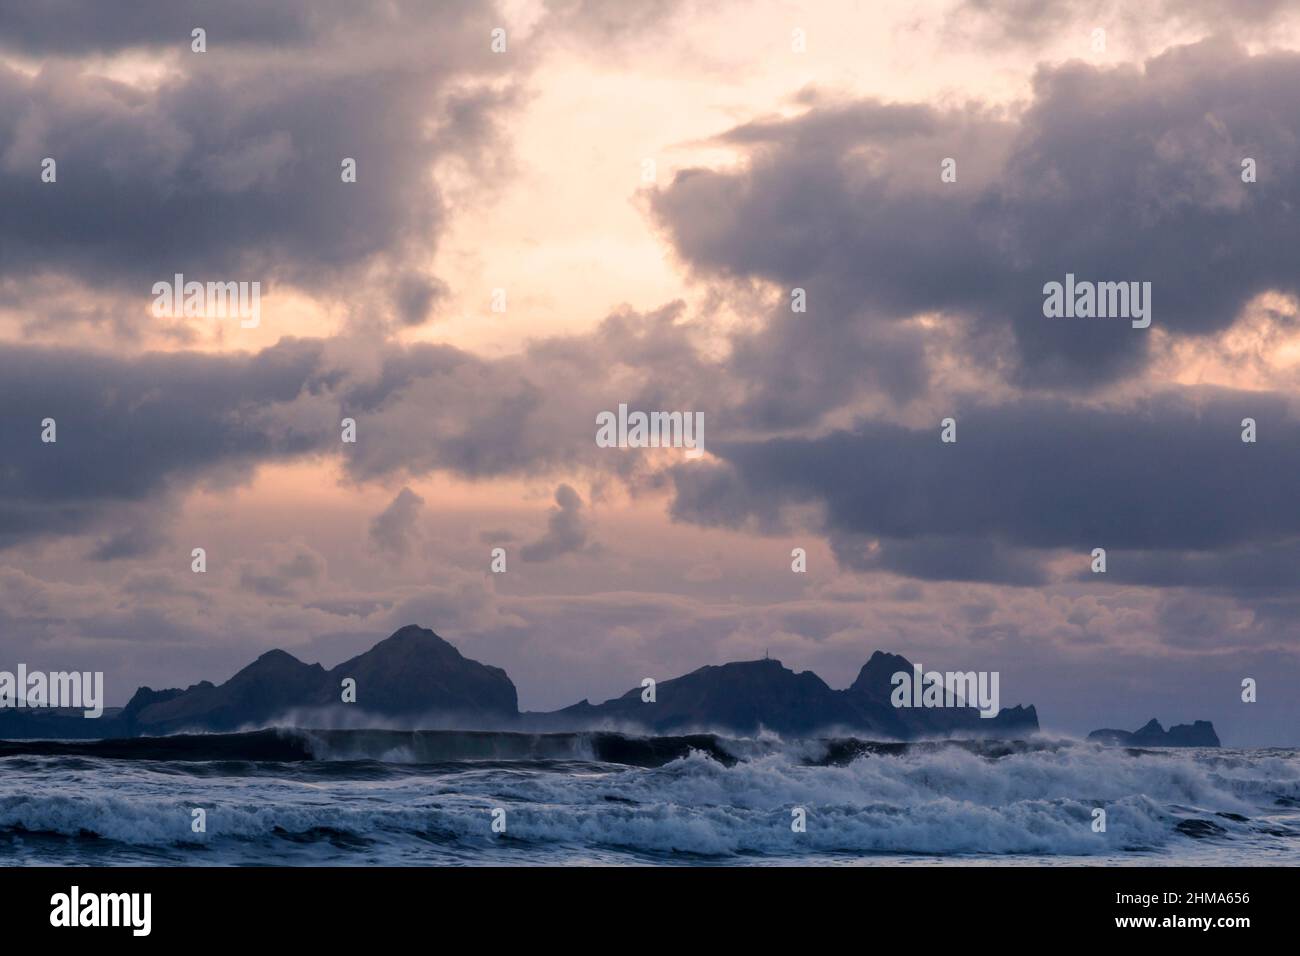 View towards Vestmannaeyjar islands off the south coast of Iceland under dramatic clouds at dusk Stock Photo